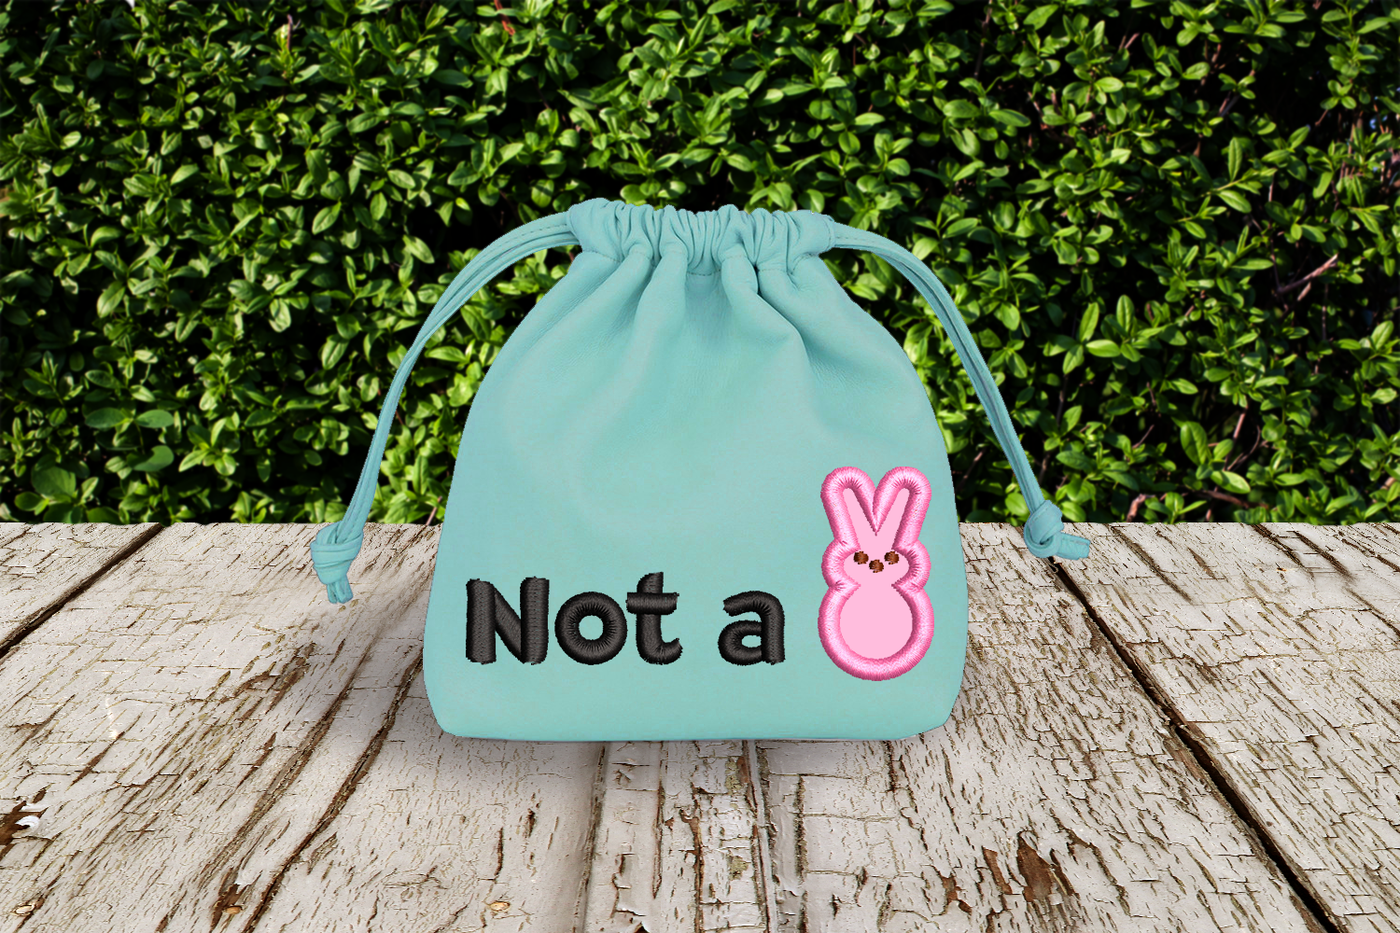 Bag with an applique design that says "Not a" with an applique marshmallow bunny after the words.